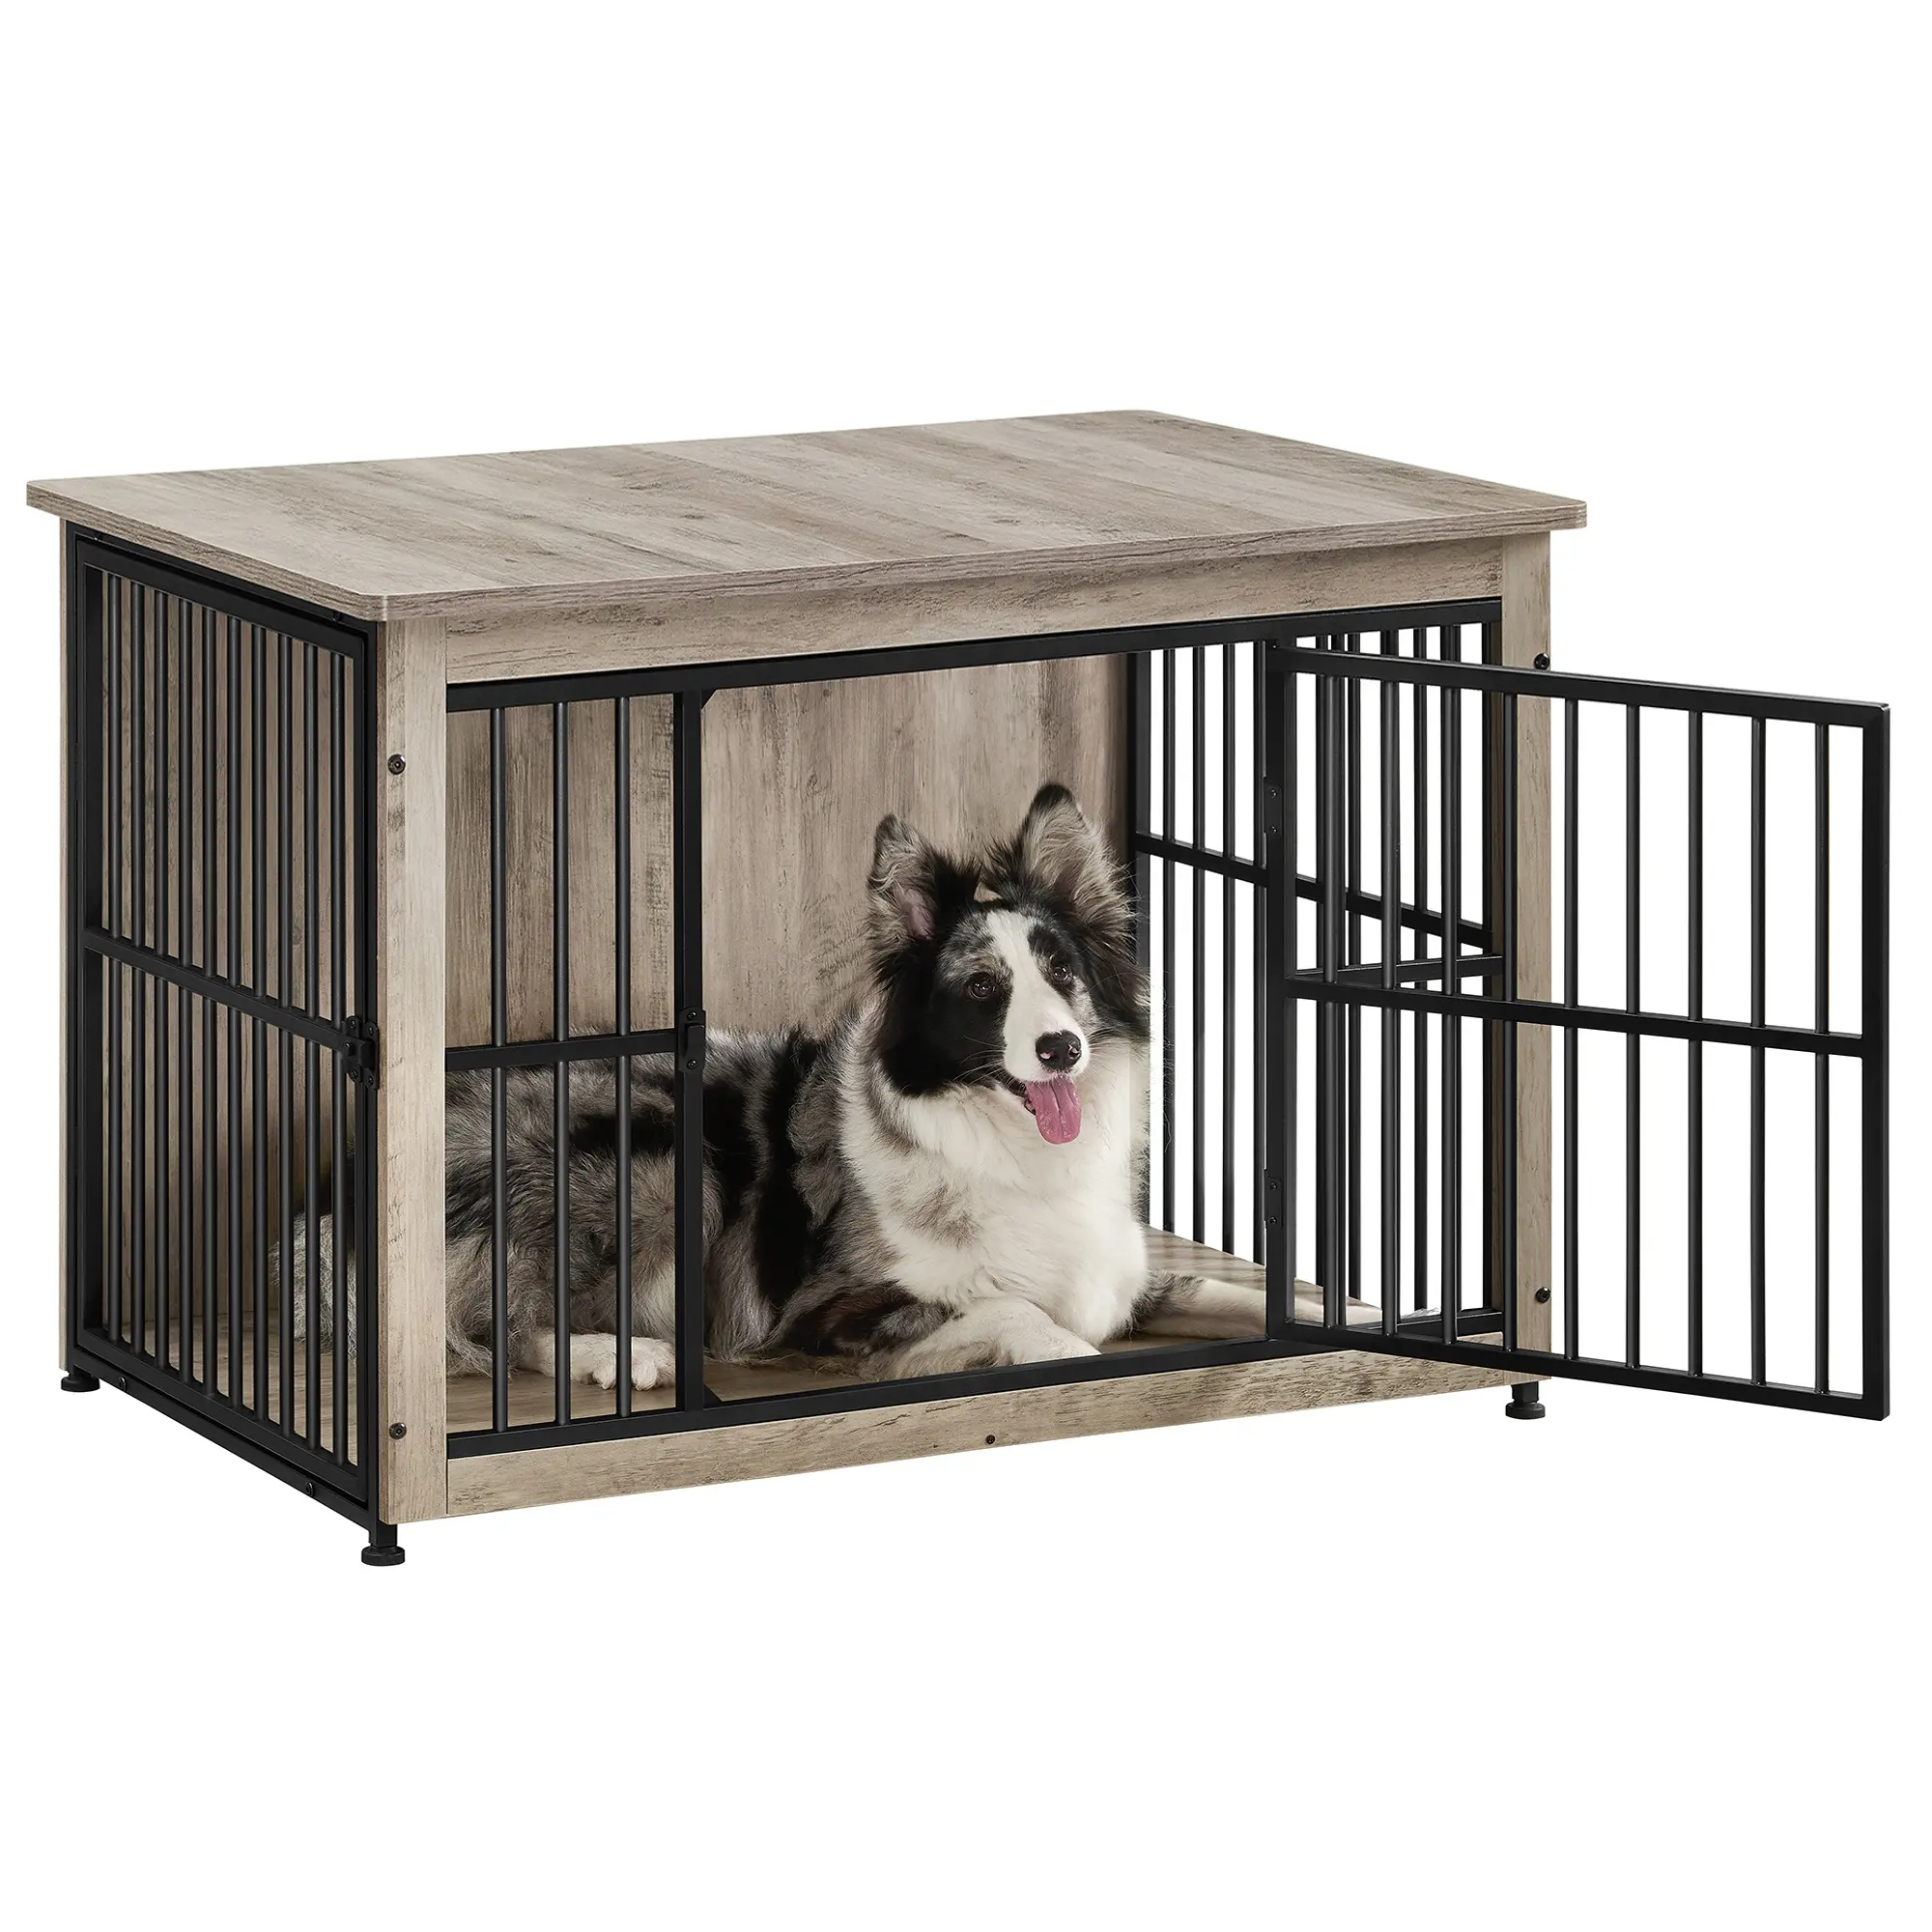 Feandrea Wholesale Heavy Duty Pet Cage Furniture Wooden Wire Home House Indoor Rustic Kennel Dog Crates For Large Dogs